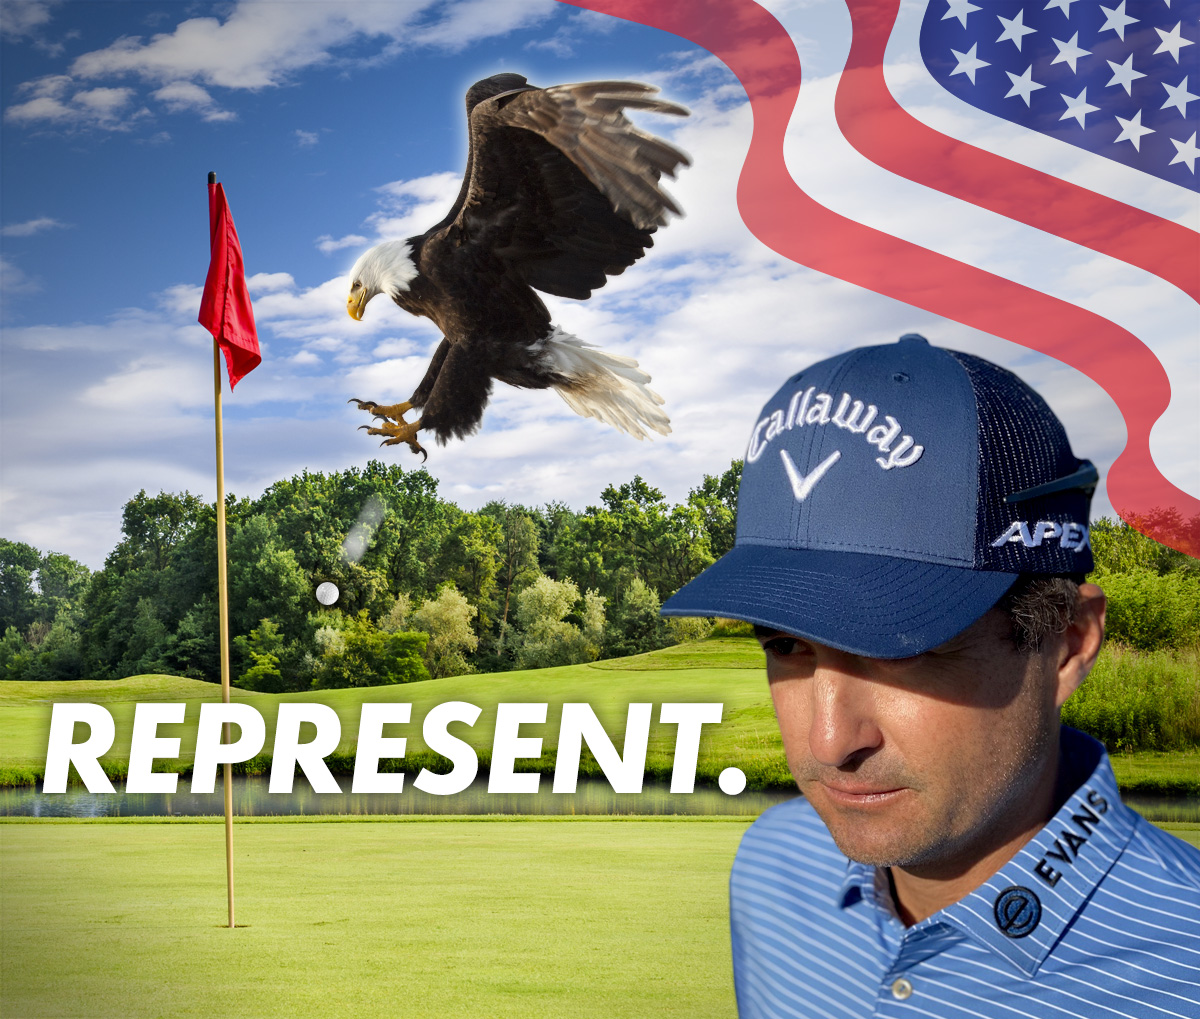 Congrats @K_Kisner on being a USA Captain's Pick for the #PresidentsCup🏆, which tees off tomorrow. It's like when Shipping Captains pick Evans for their transportation management needs. There aren't Shipping Captains? There should be Shipping Captains. #eagle #leftcollar #Kiz